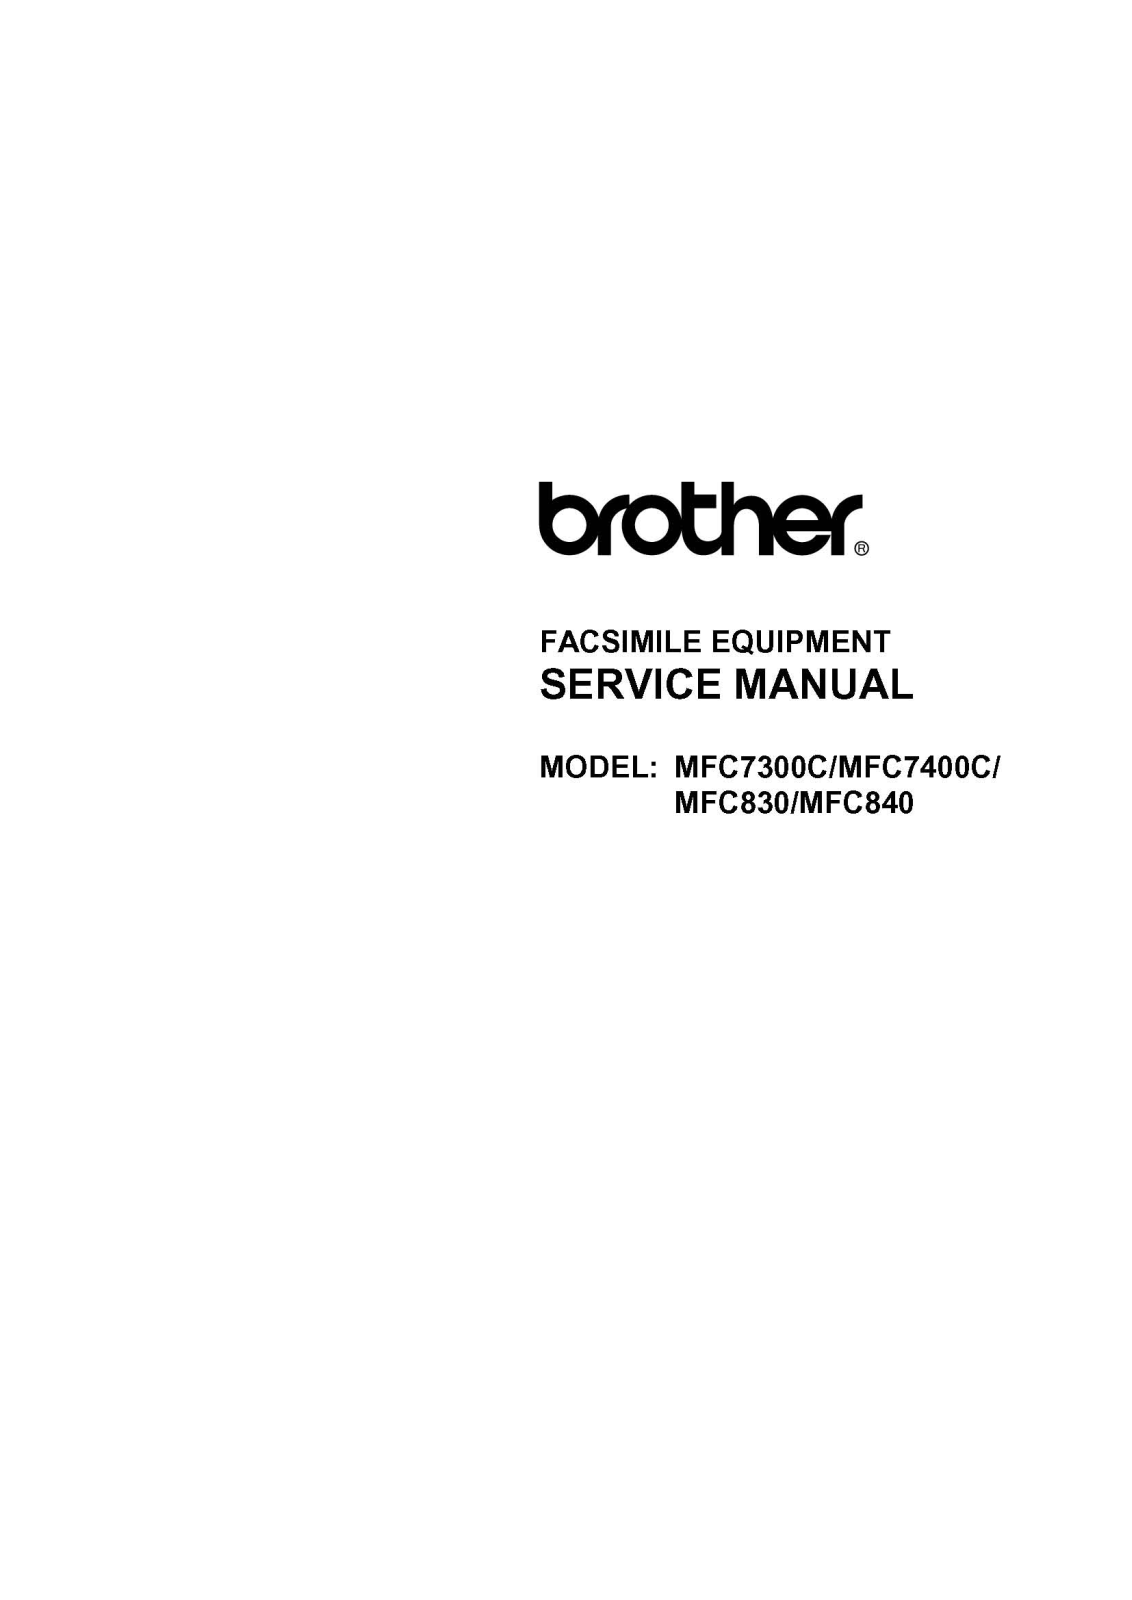 Brother MFC-840, MFC-830, MFC-7400C, MFC-7300C Service Manual